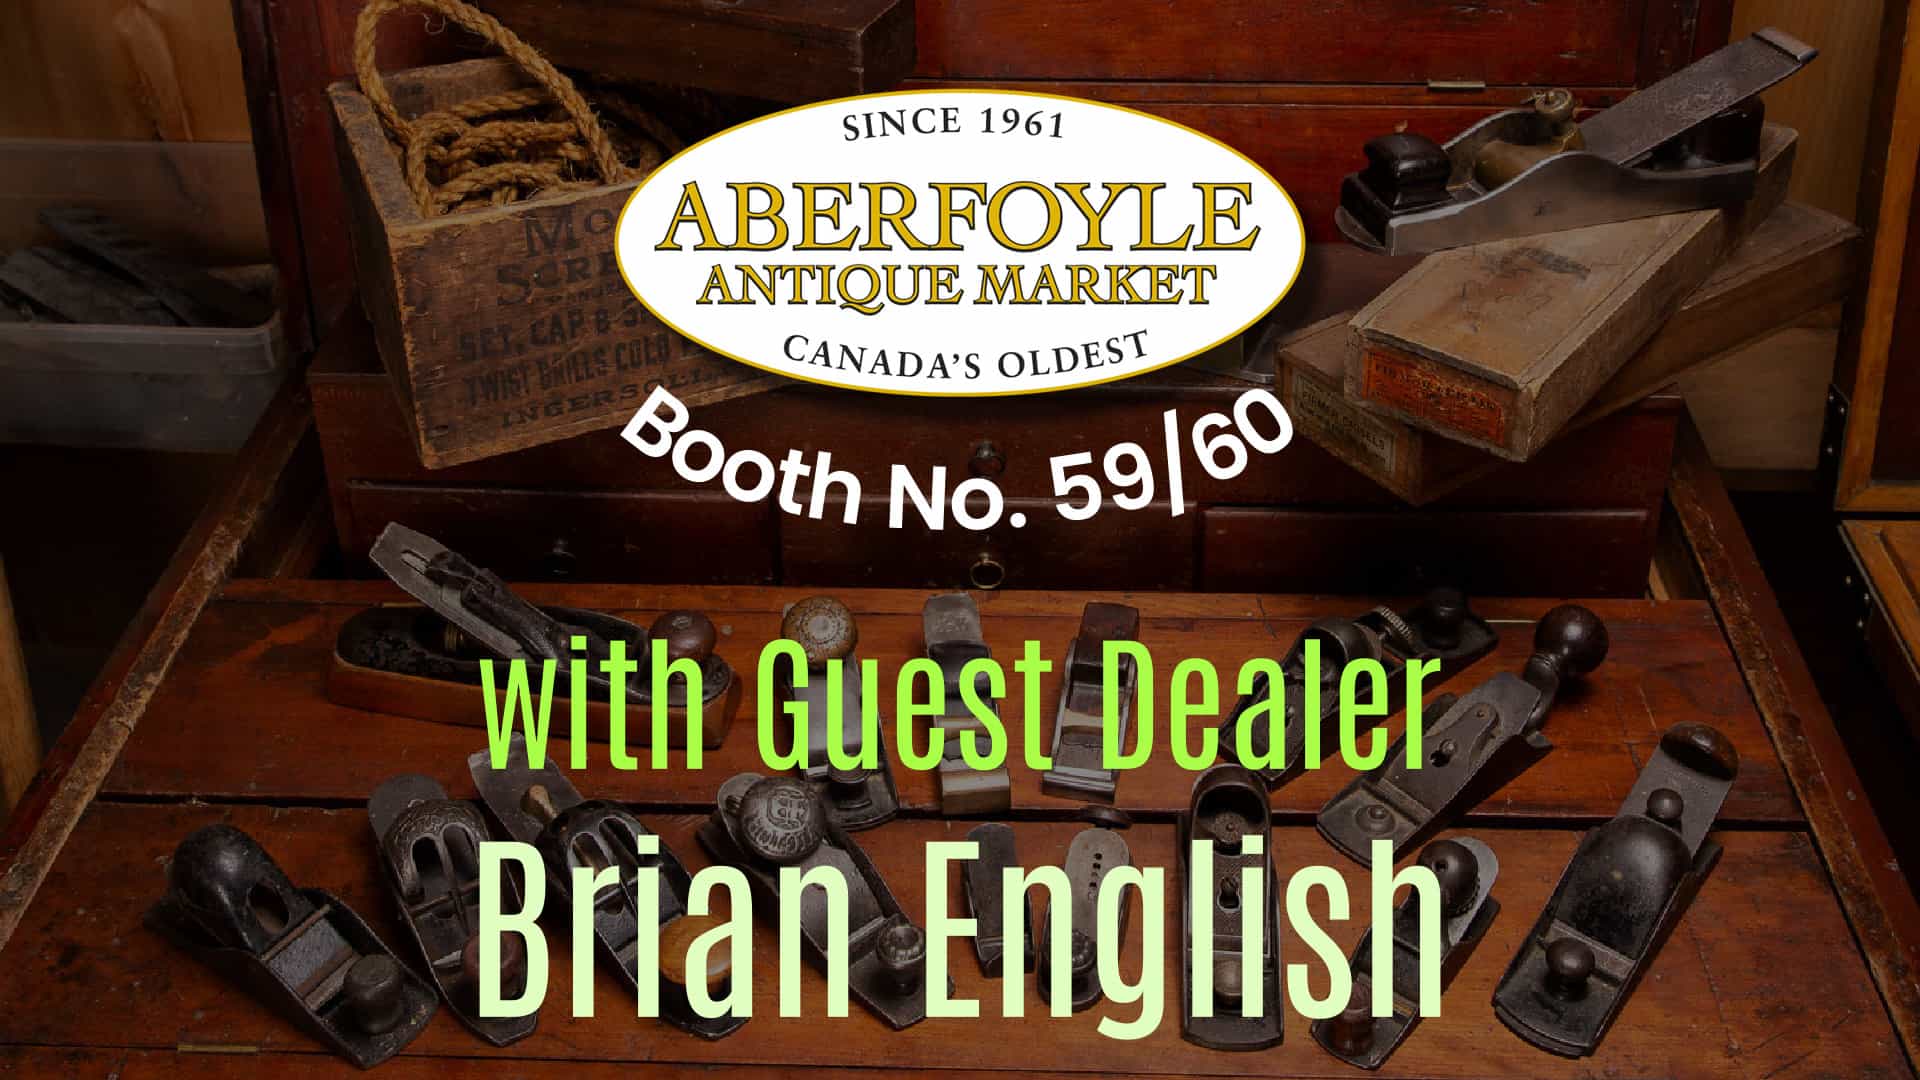 At The Aberfoyle Antique Market-with Guest Dealer Brian English